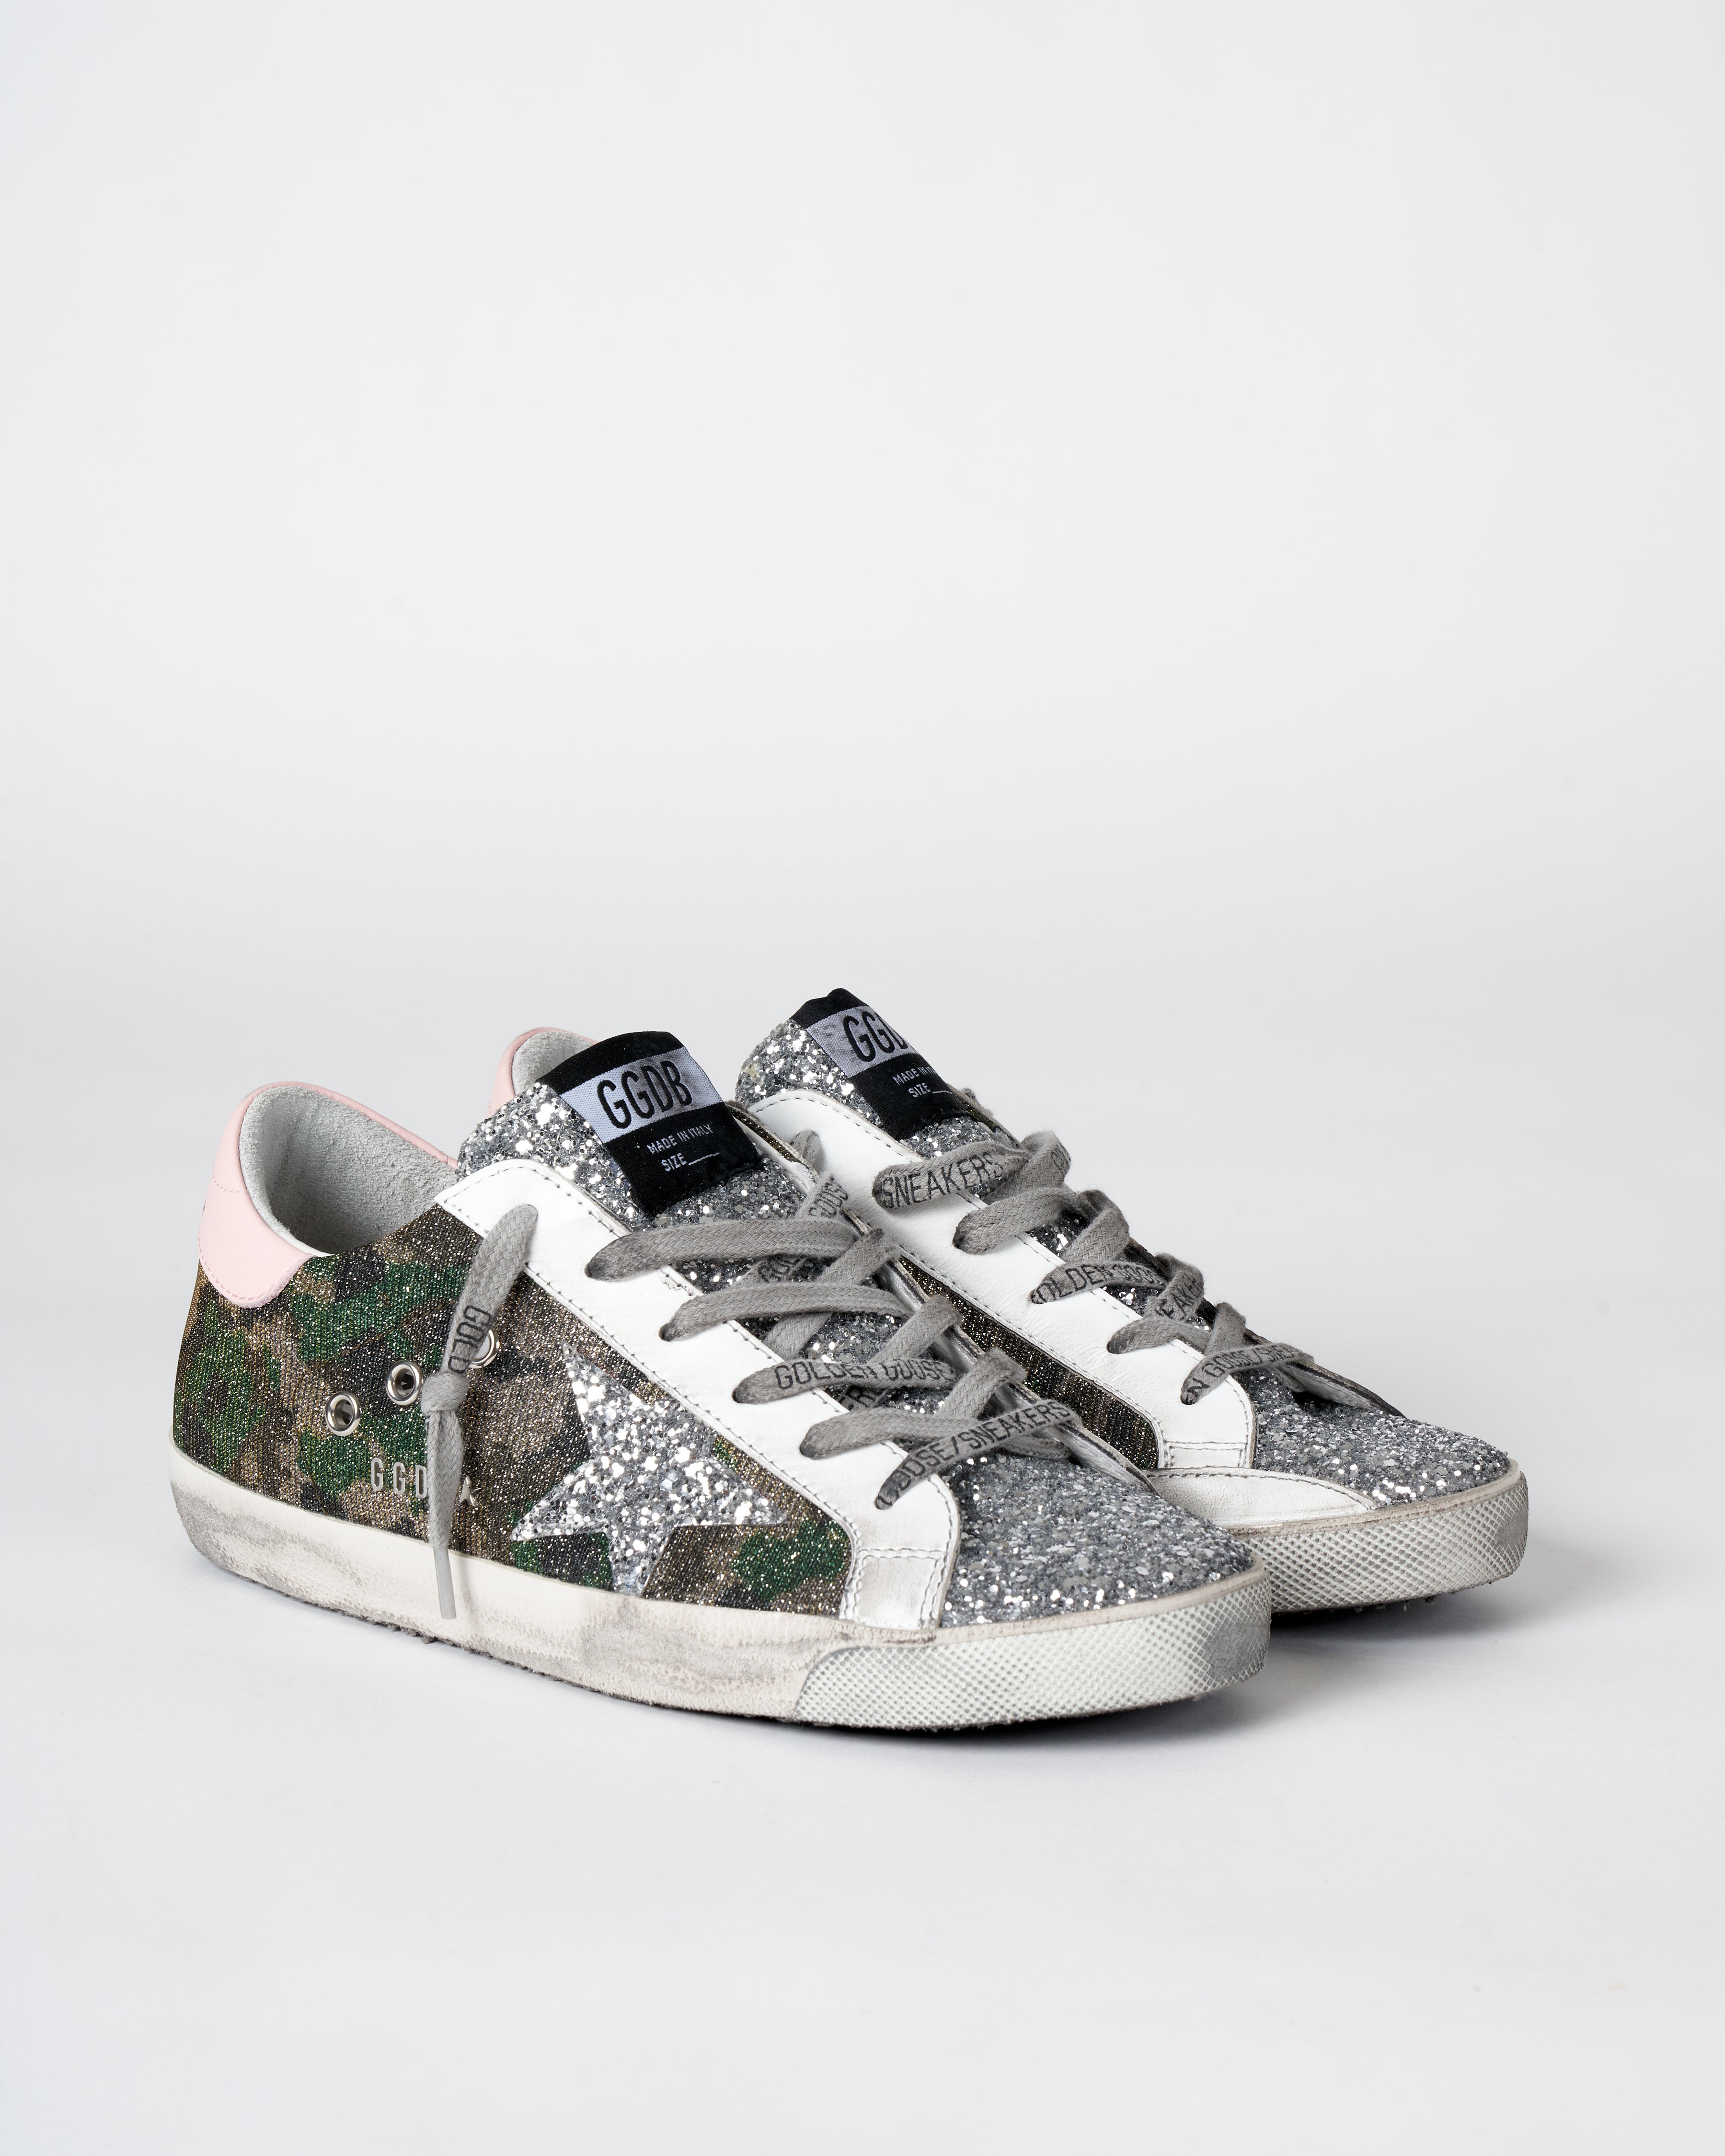 Golden Goose Superstar Lurex Camouflage Glitter Upper Silver Toe And Star  Leather Heel Green Camouflage/Silver/Pink/White 80828